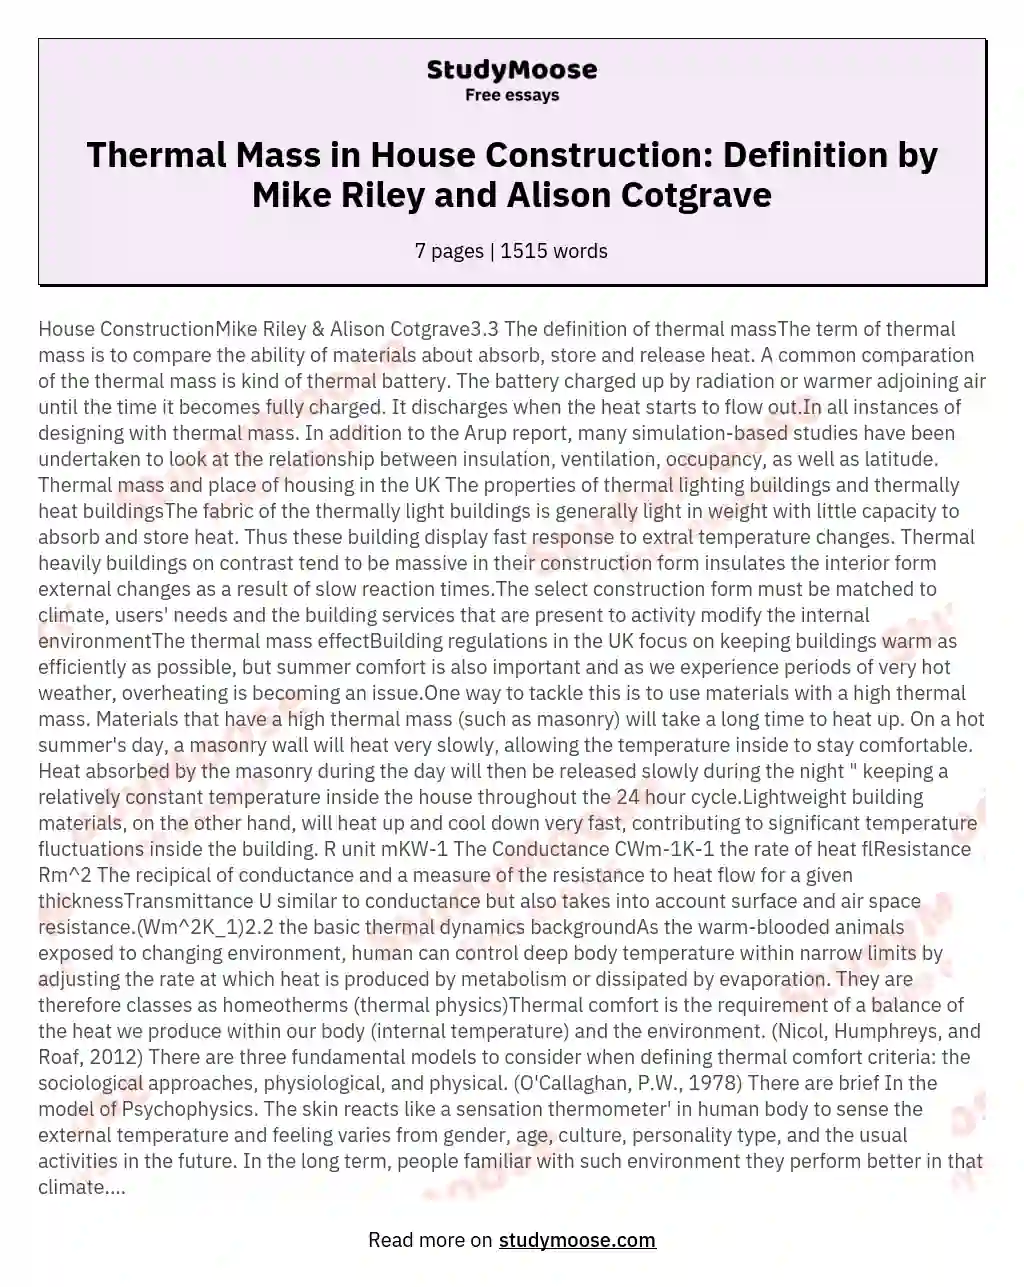 Thermal Mass in House Construction: Definition by Mike Riley and Alison Cotgrave essay